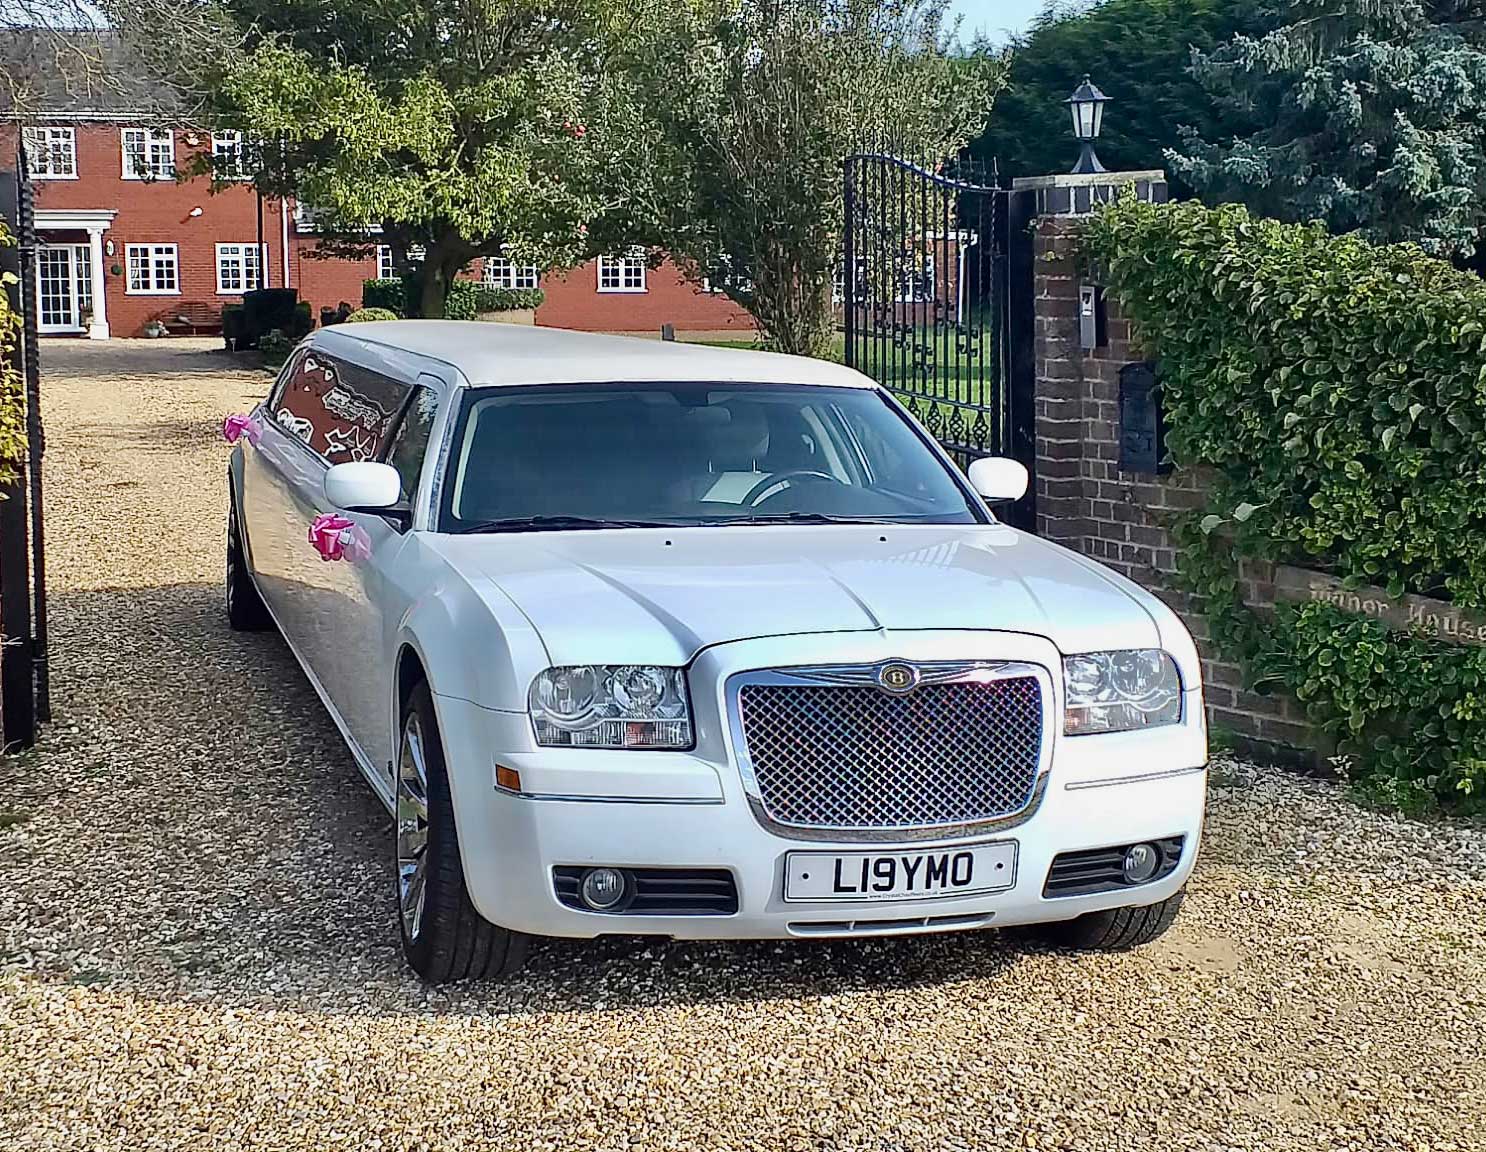 Wedding Limo Hire In Oxfordshire